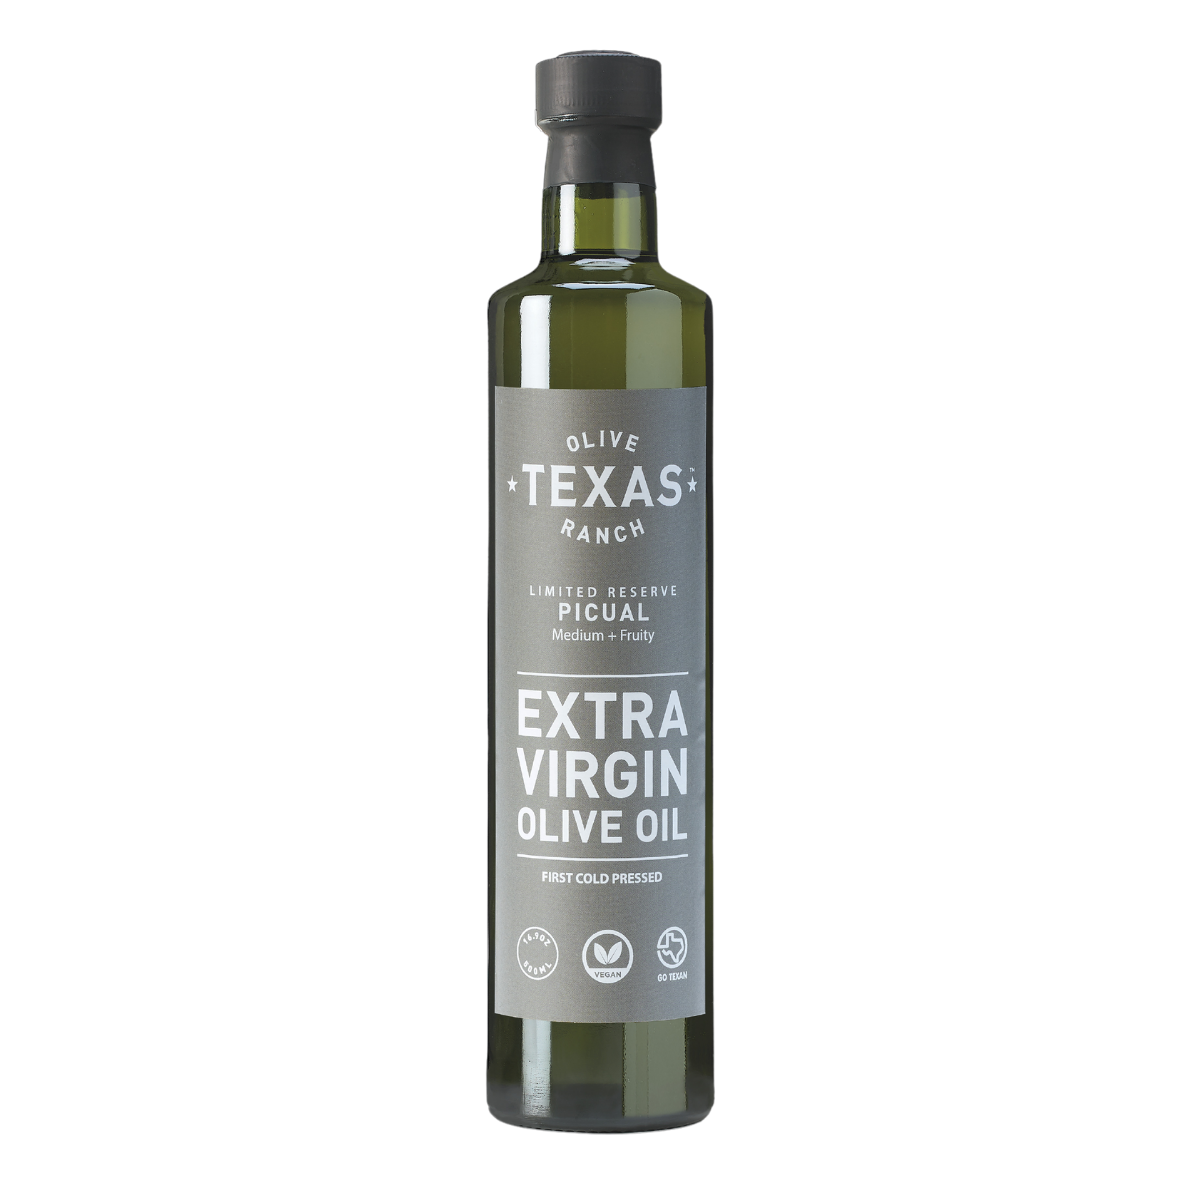 PicualLimitedReserveOliveOil-TexasOliveOil.png